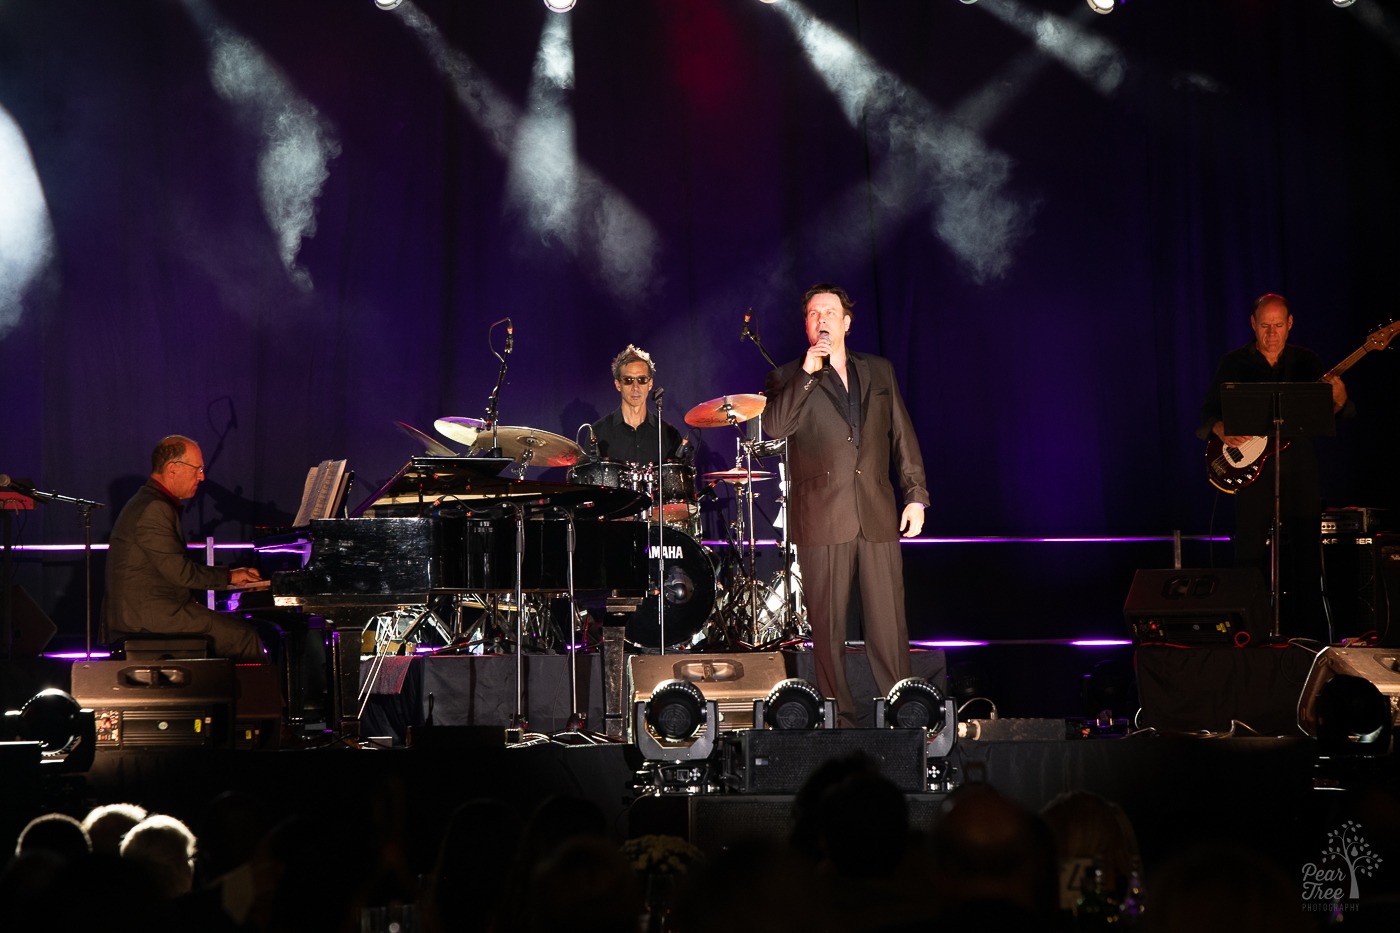 Richard Todd Adams singing live on stage with Neil Berg playing piano during the Night of Broadway Stars 2021